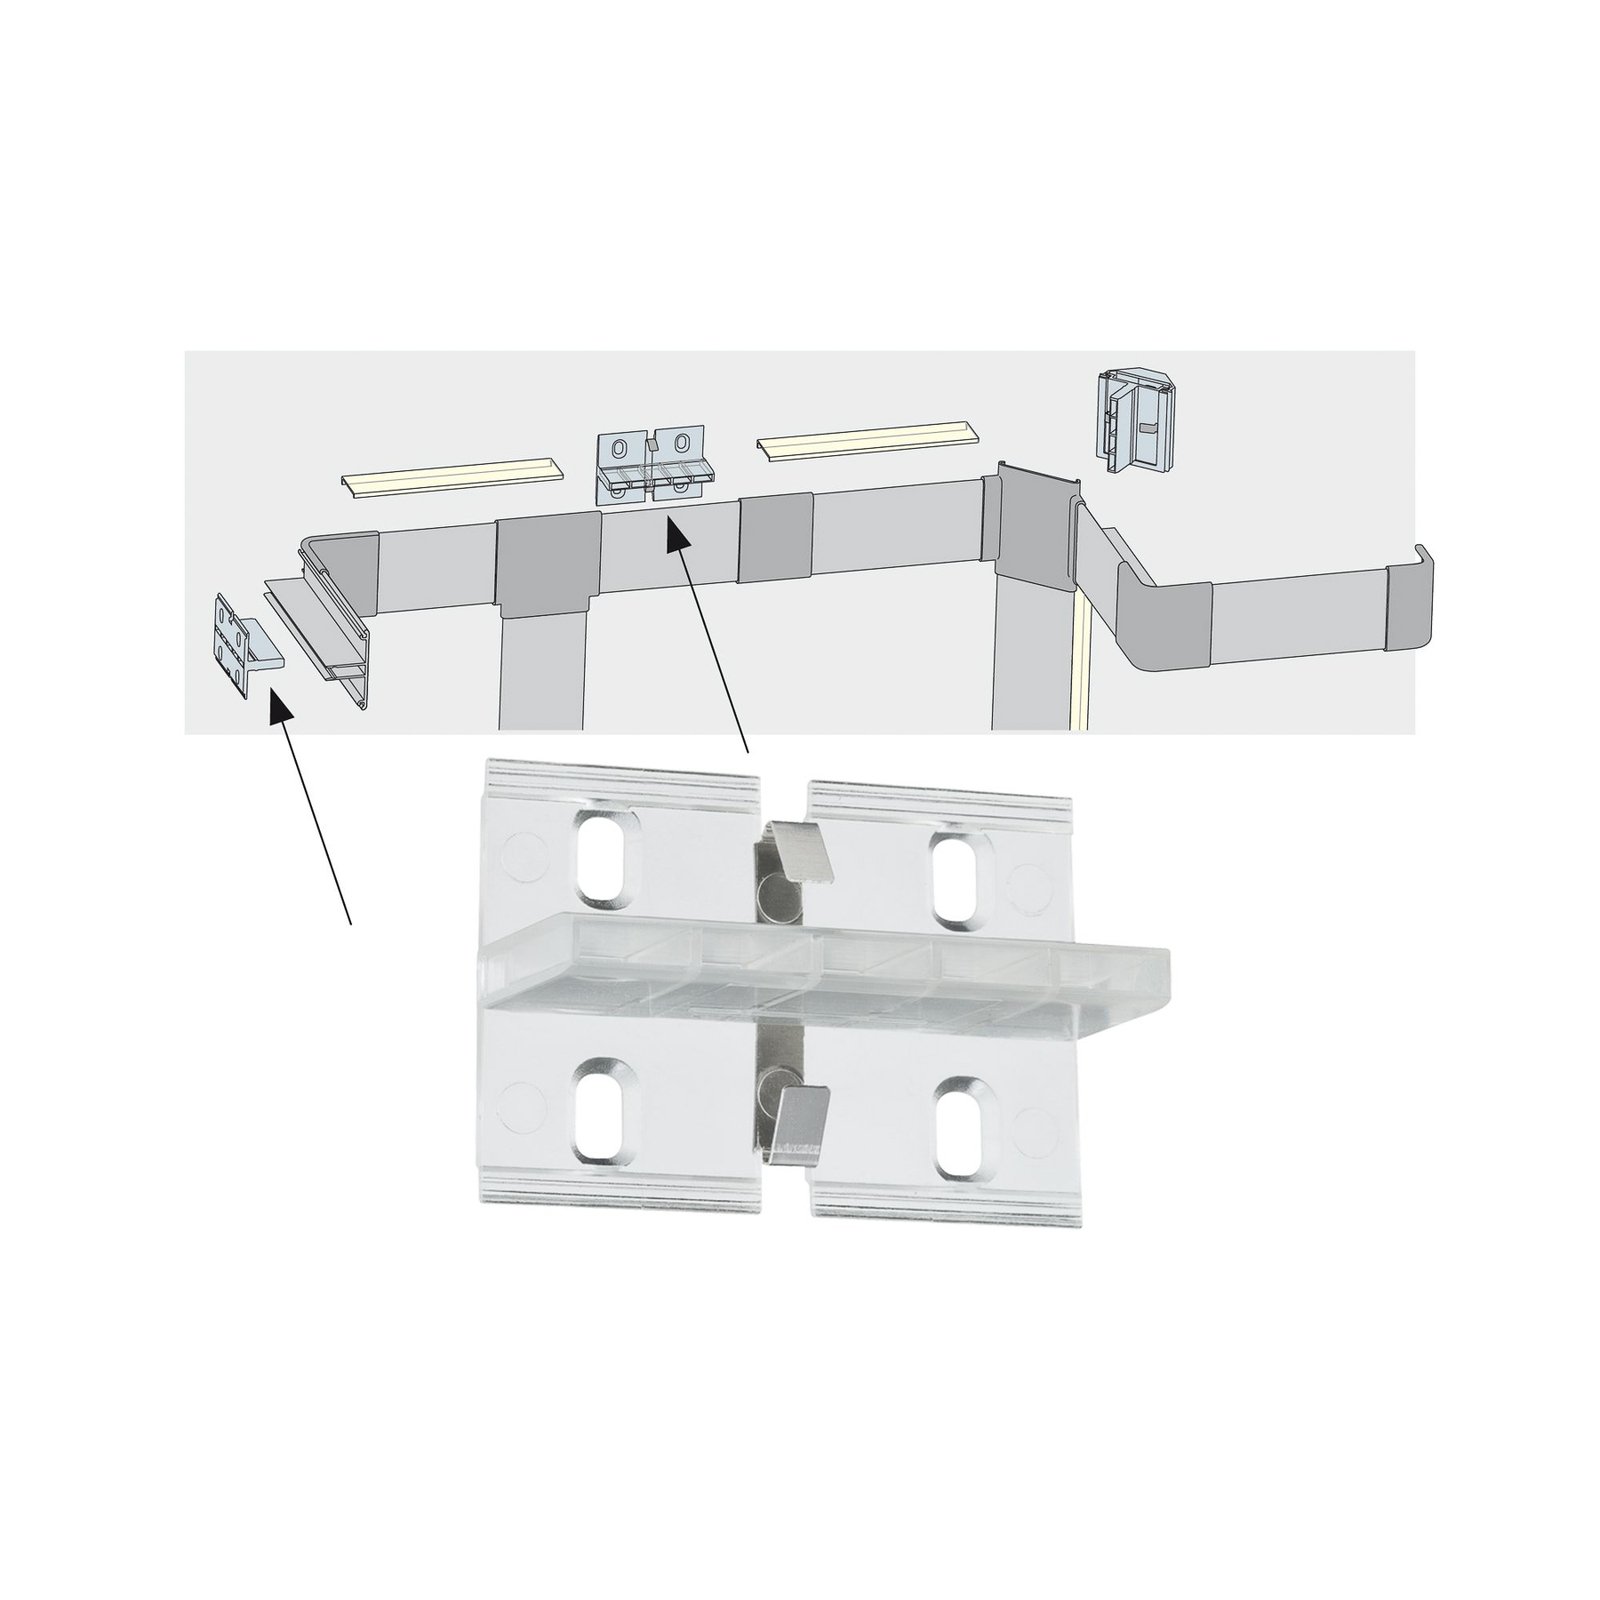 Duo Profile wall bracket for LED strip system